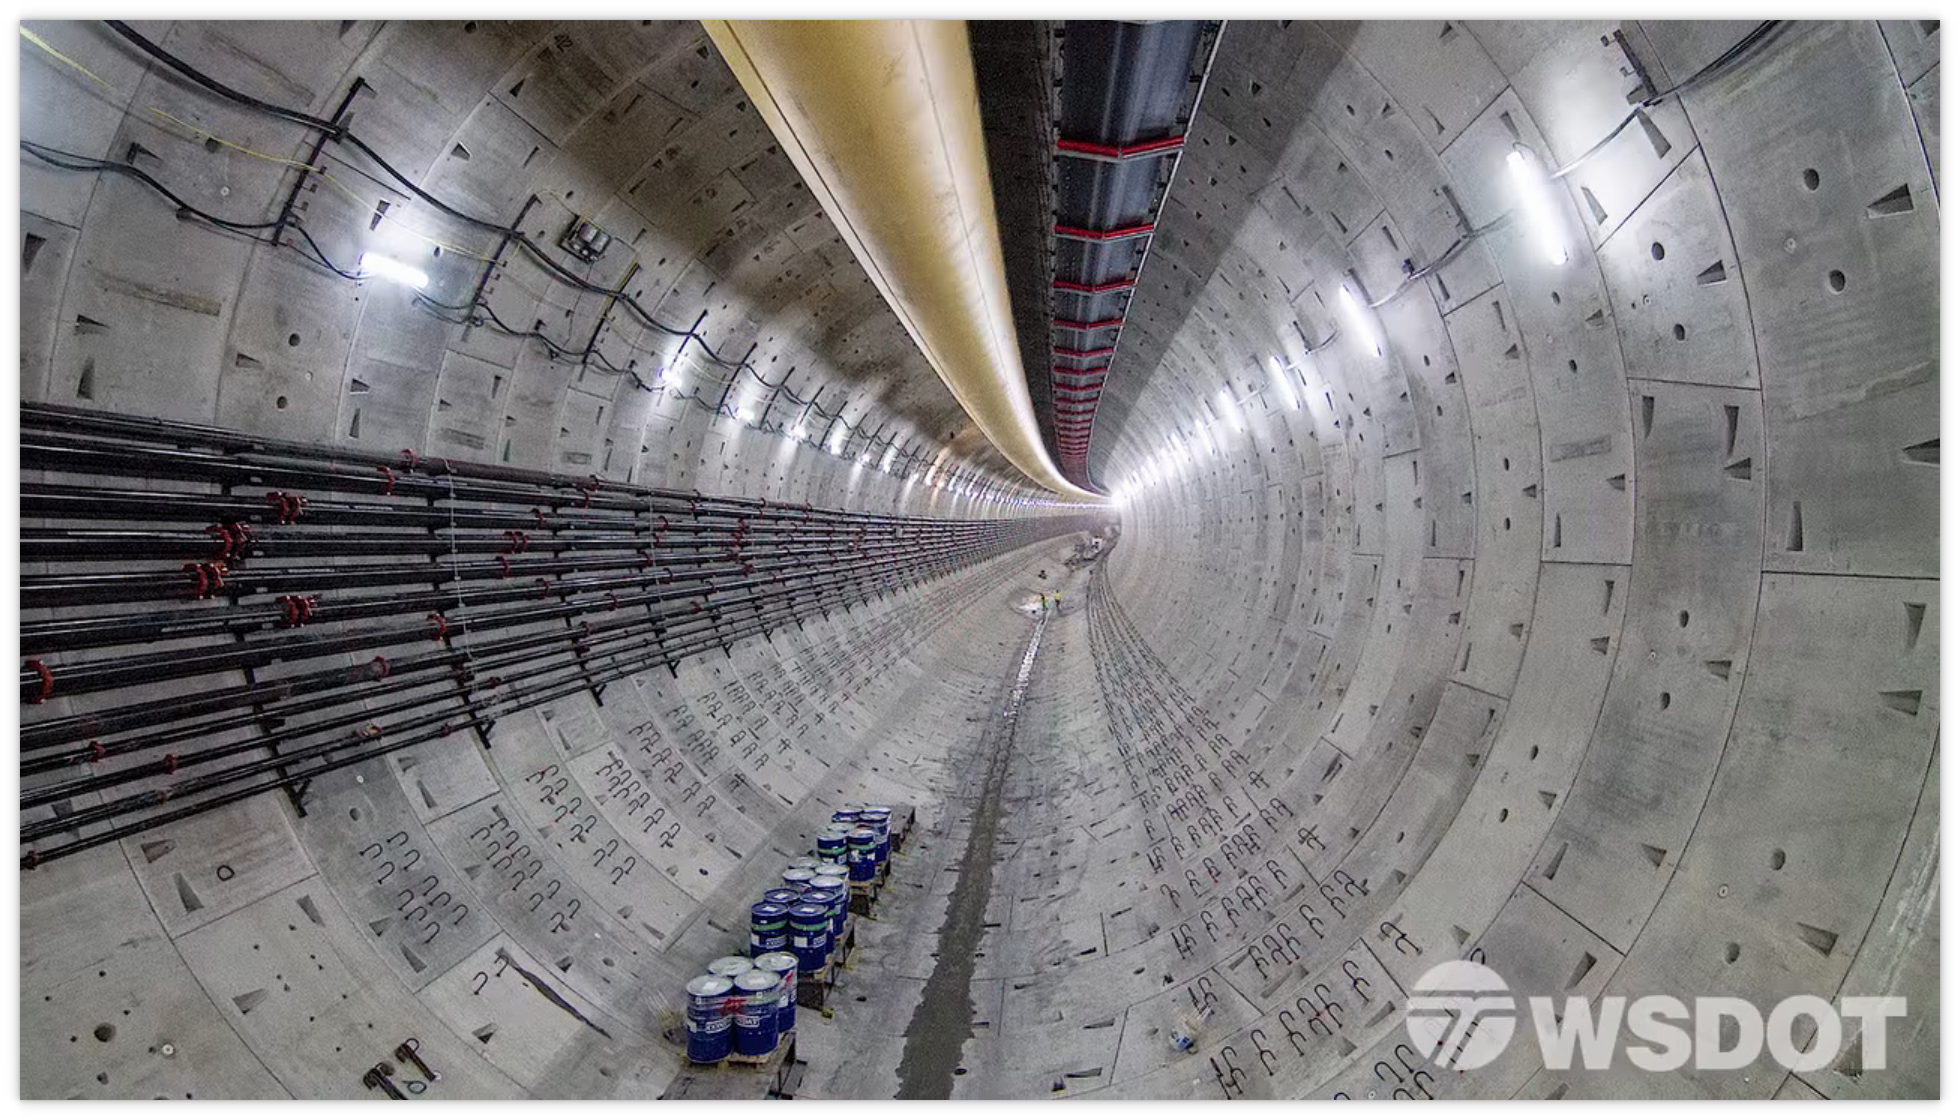 Still image of the new SR 99 Tunnel provided by WSDOT